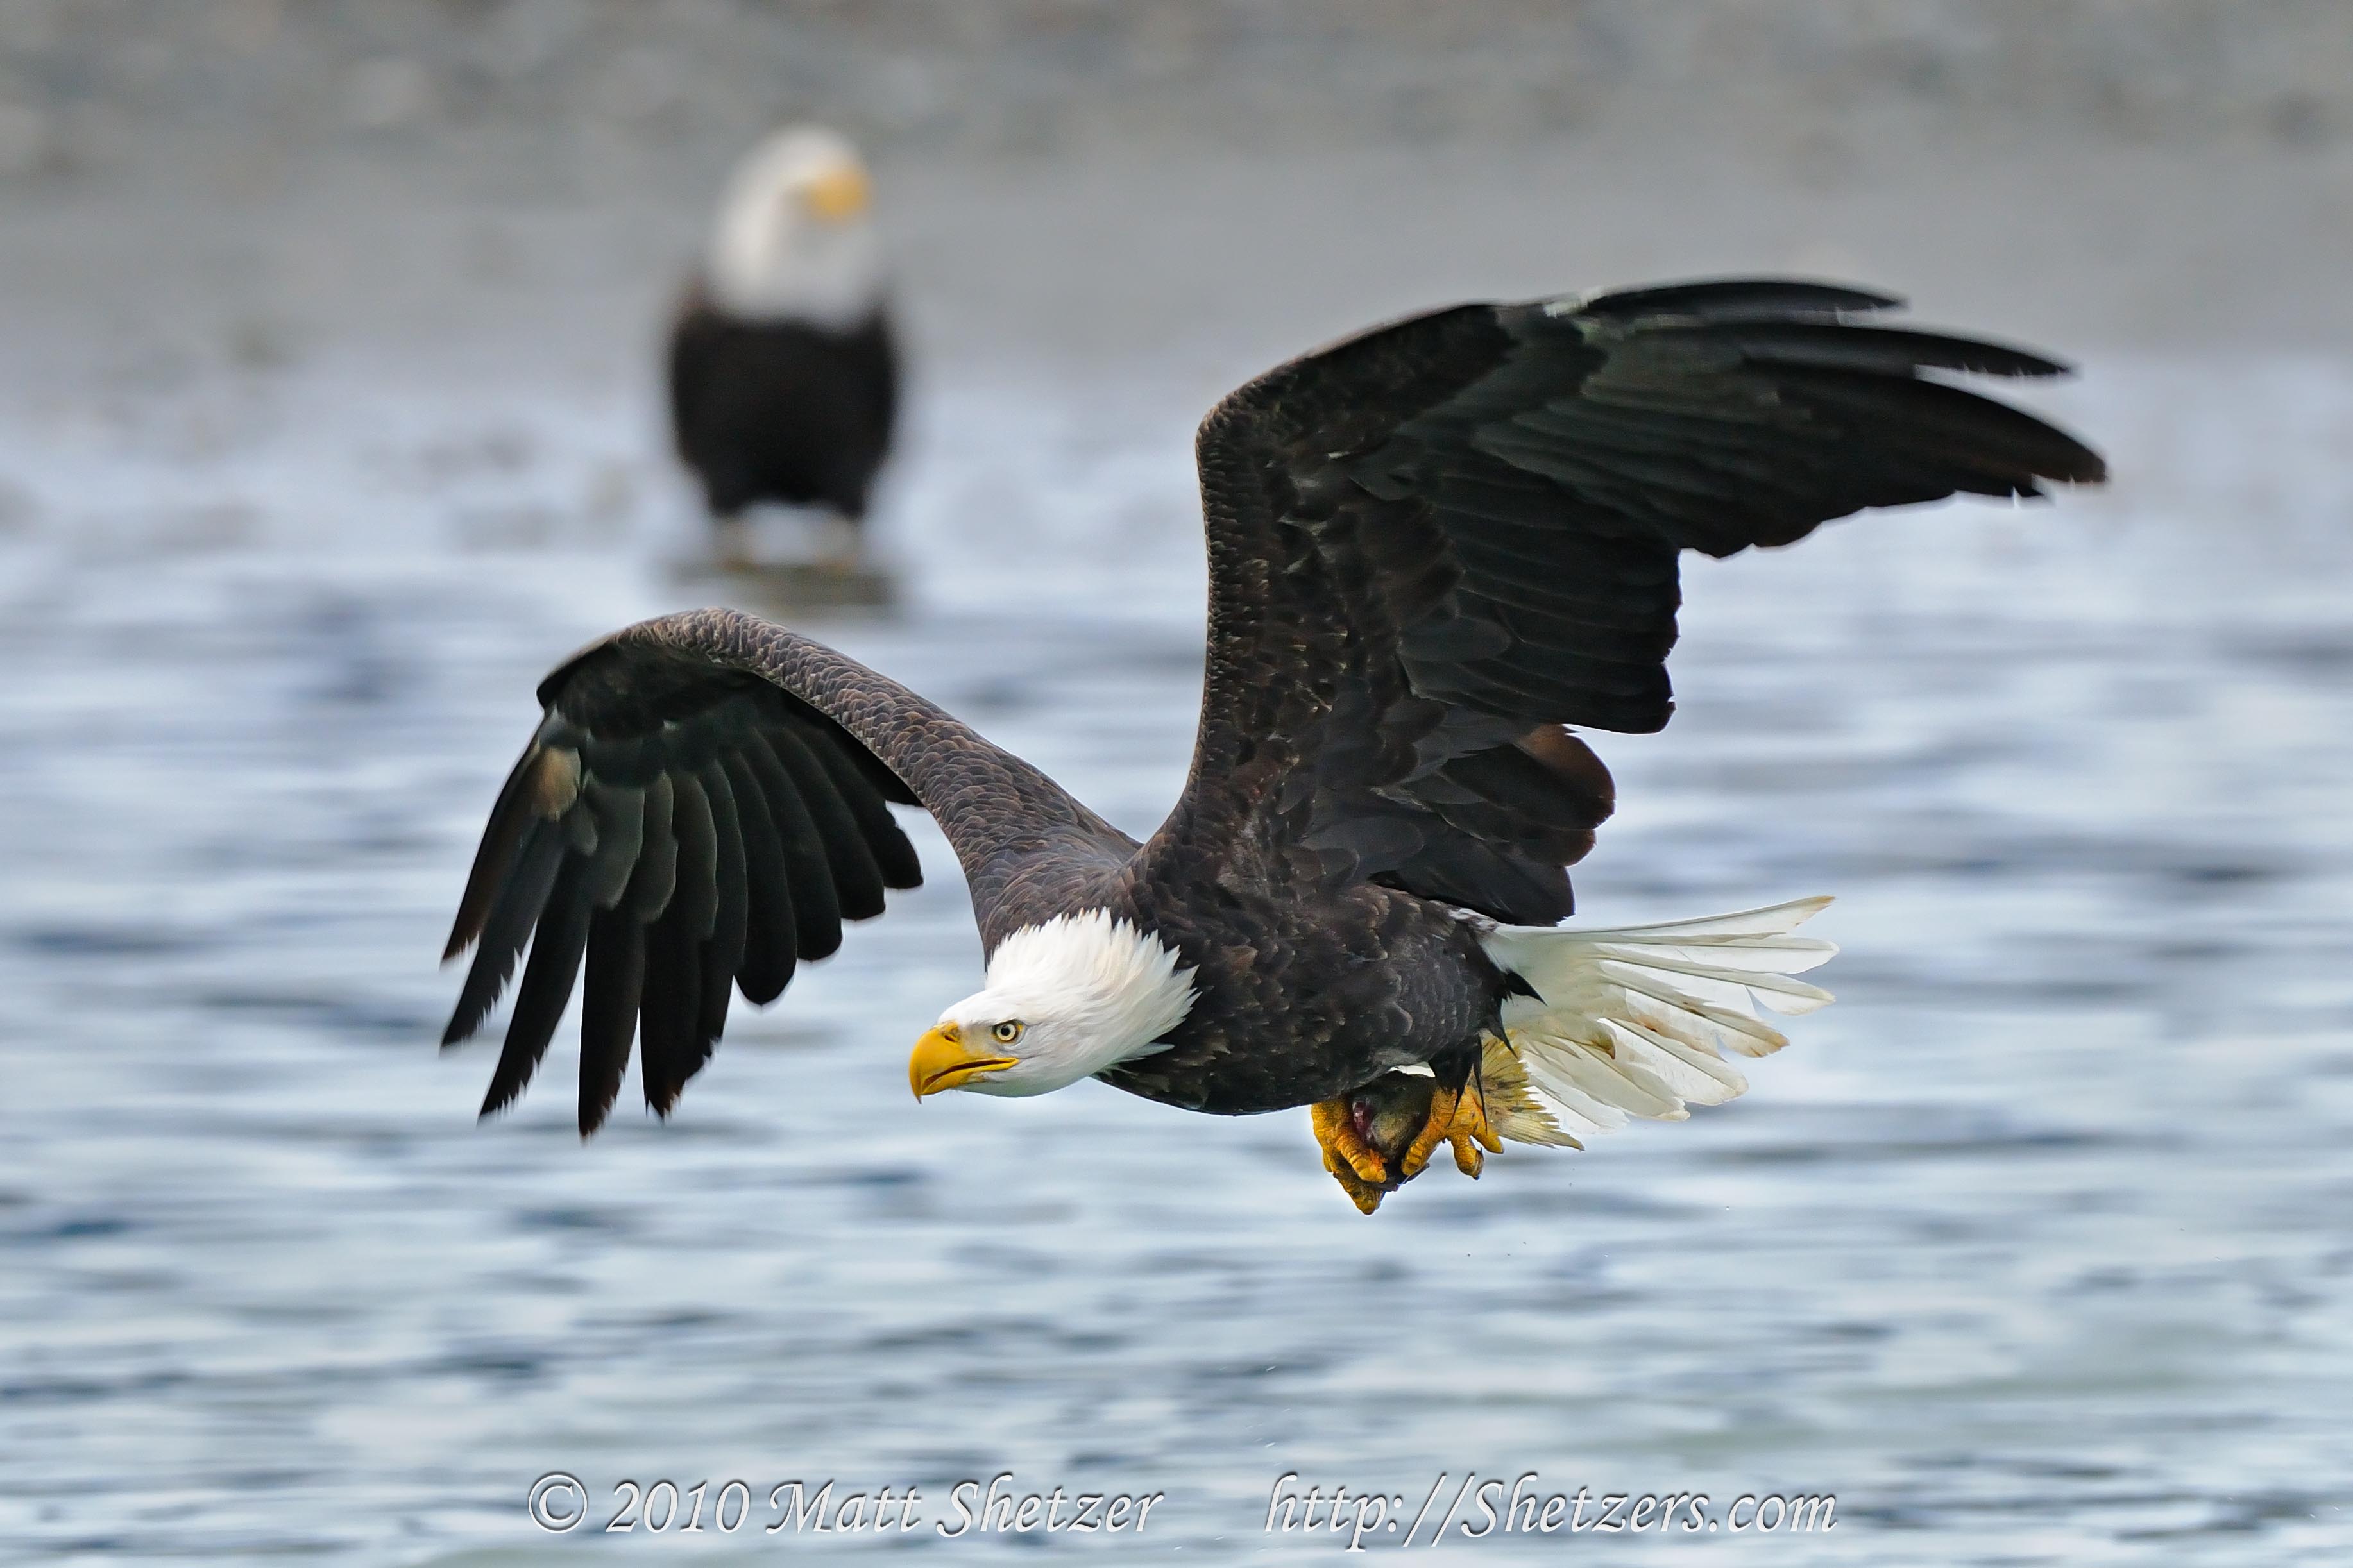 Mobile Desktop Background Hd A Picture Of A Bald Eagle